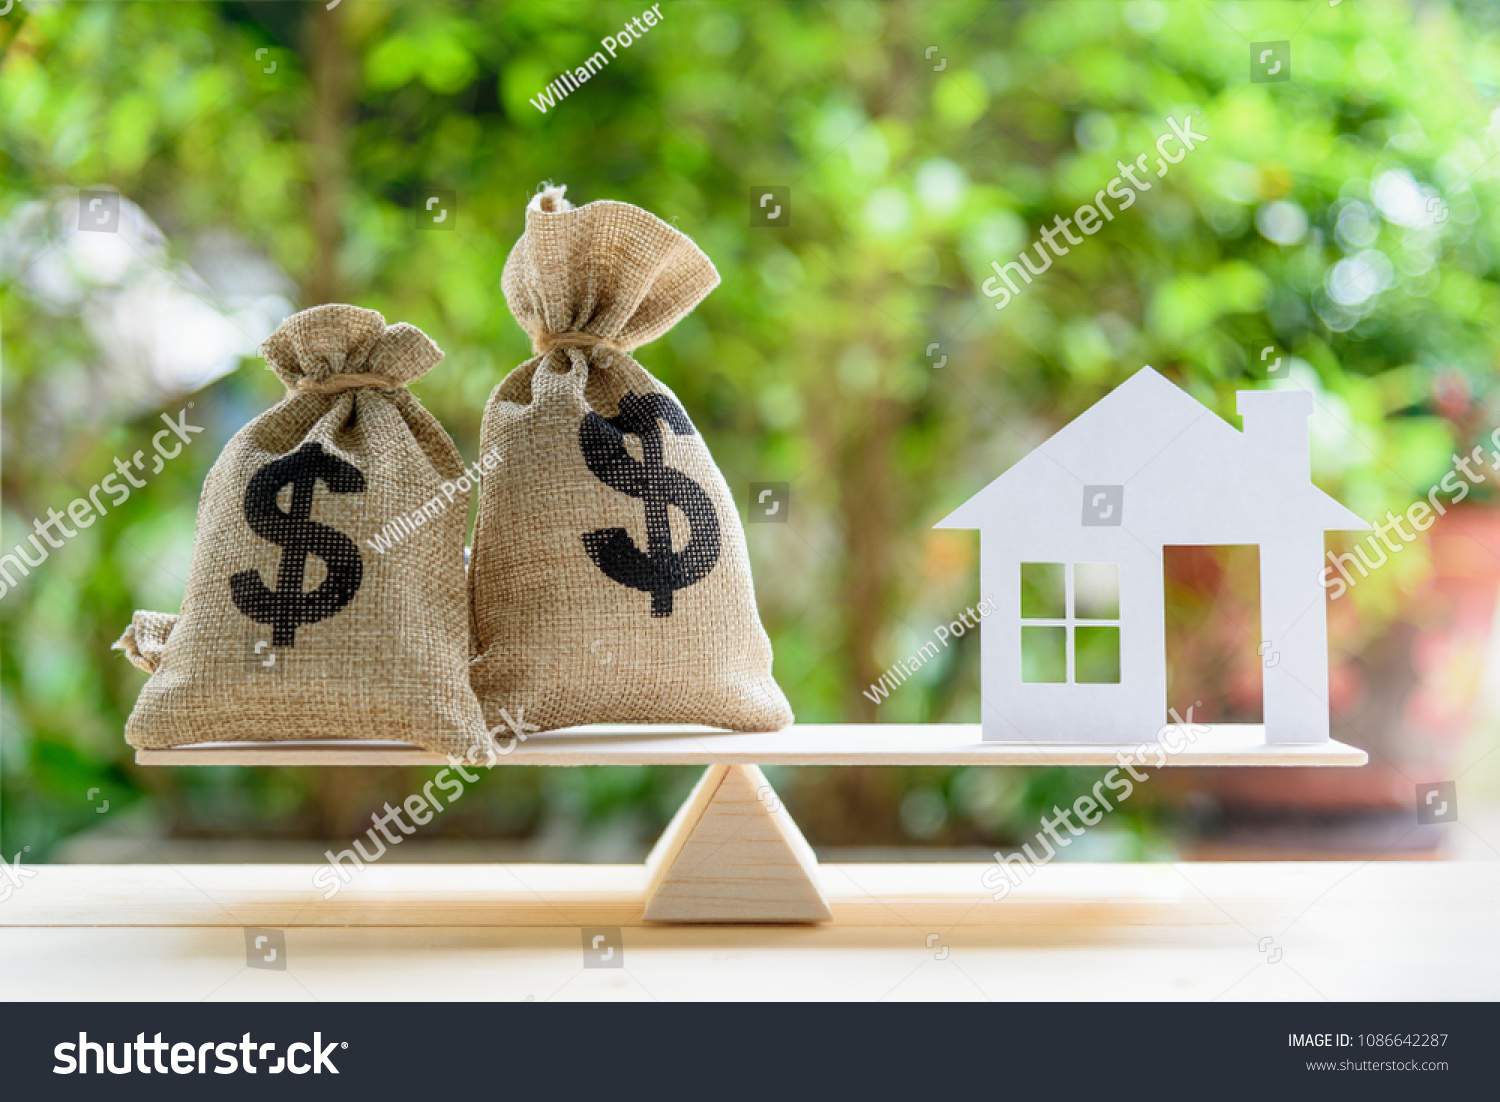 Home loan / reverse mortgage or transforming assets into cash concept : House paper model , US dollar hessian bags on a wood balance scale, depicts a homeowner or a borrower turns properties into cash #1086642287